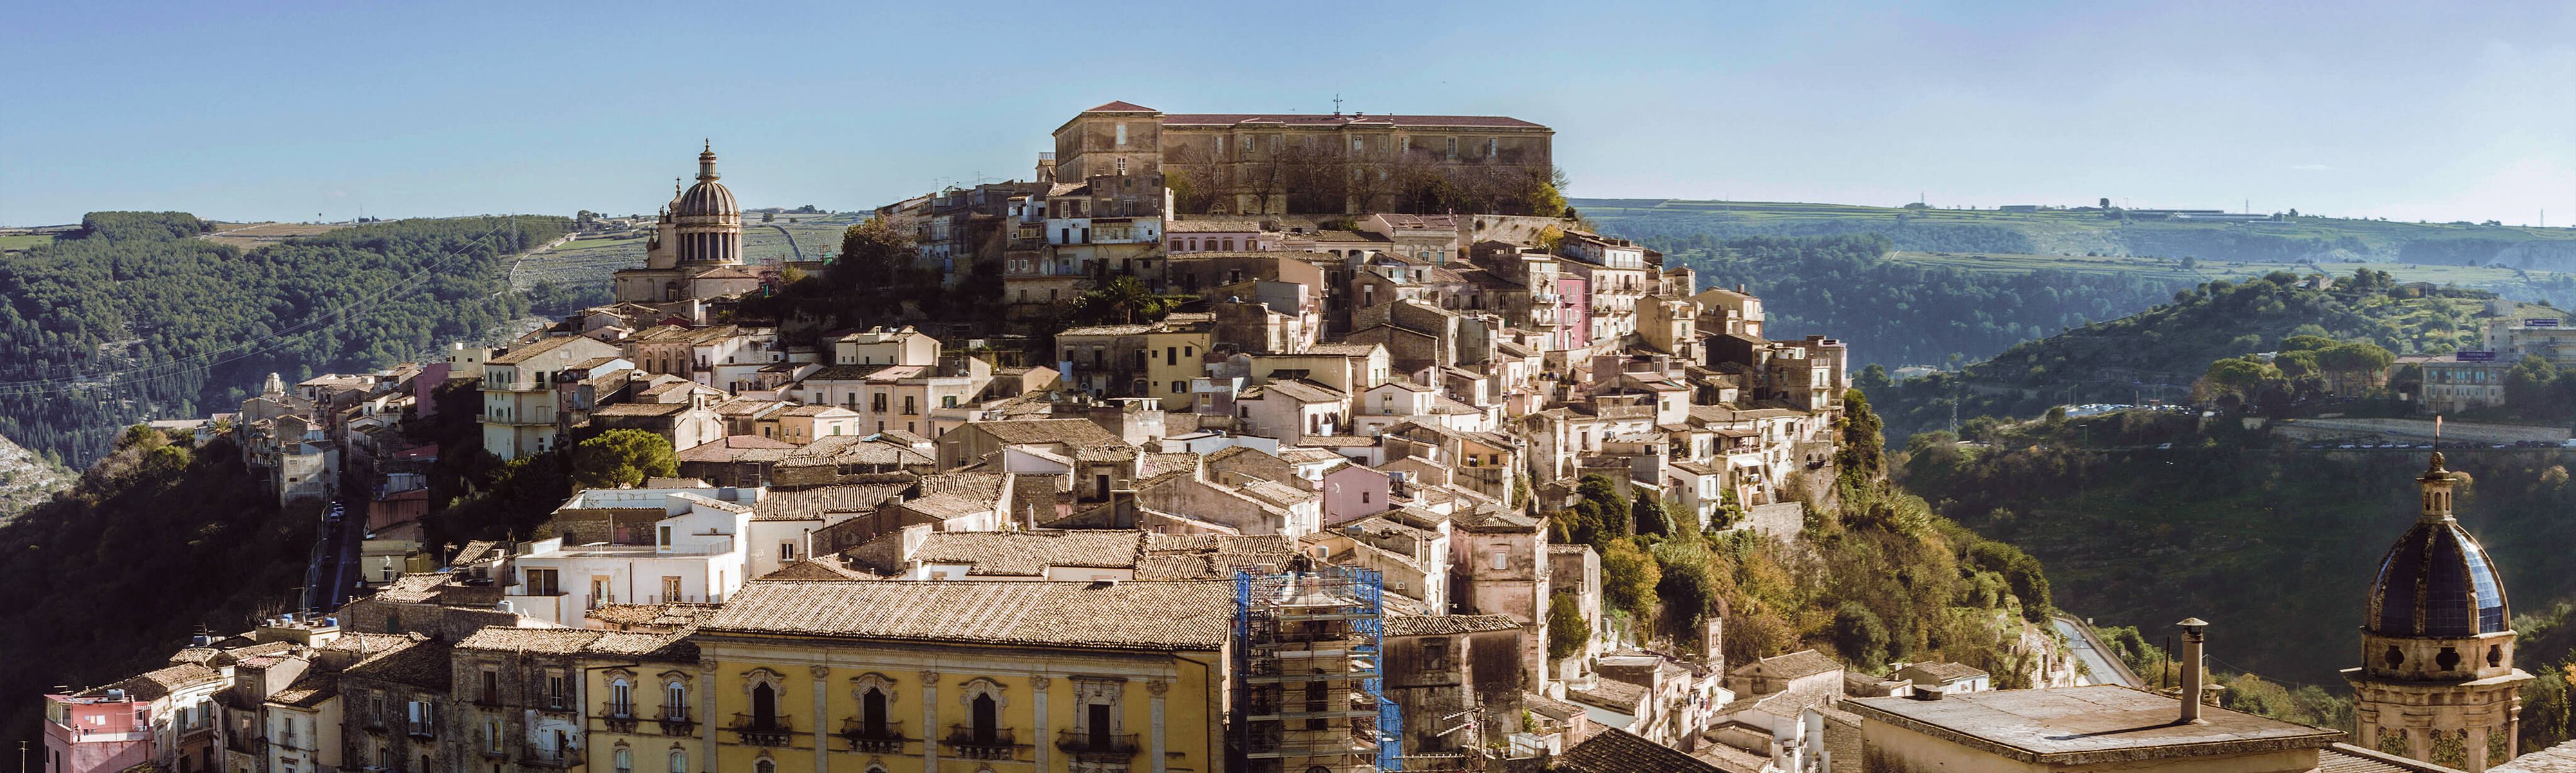 view-of-sicilian-city-ragusa-on-a-hill